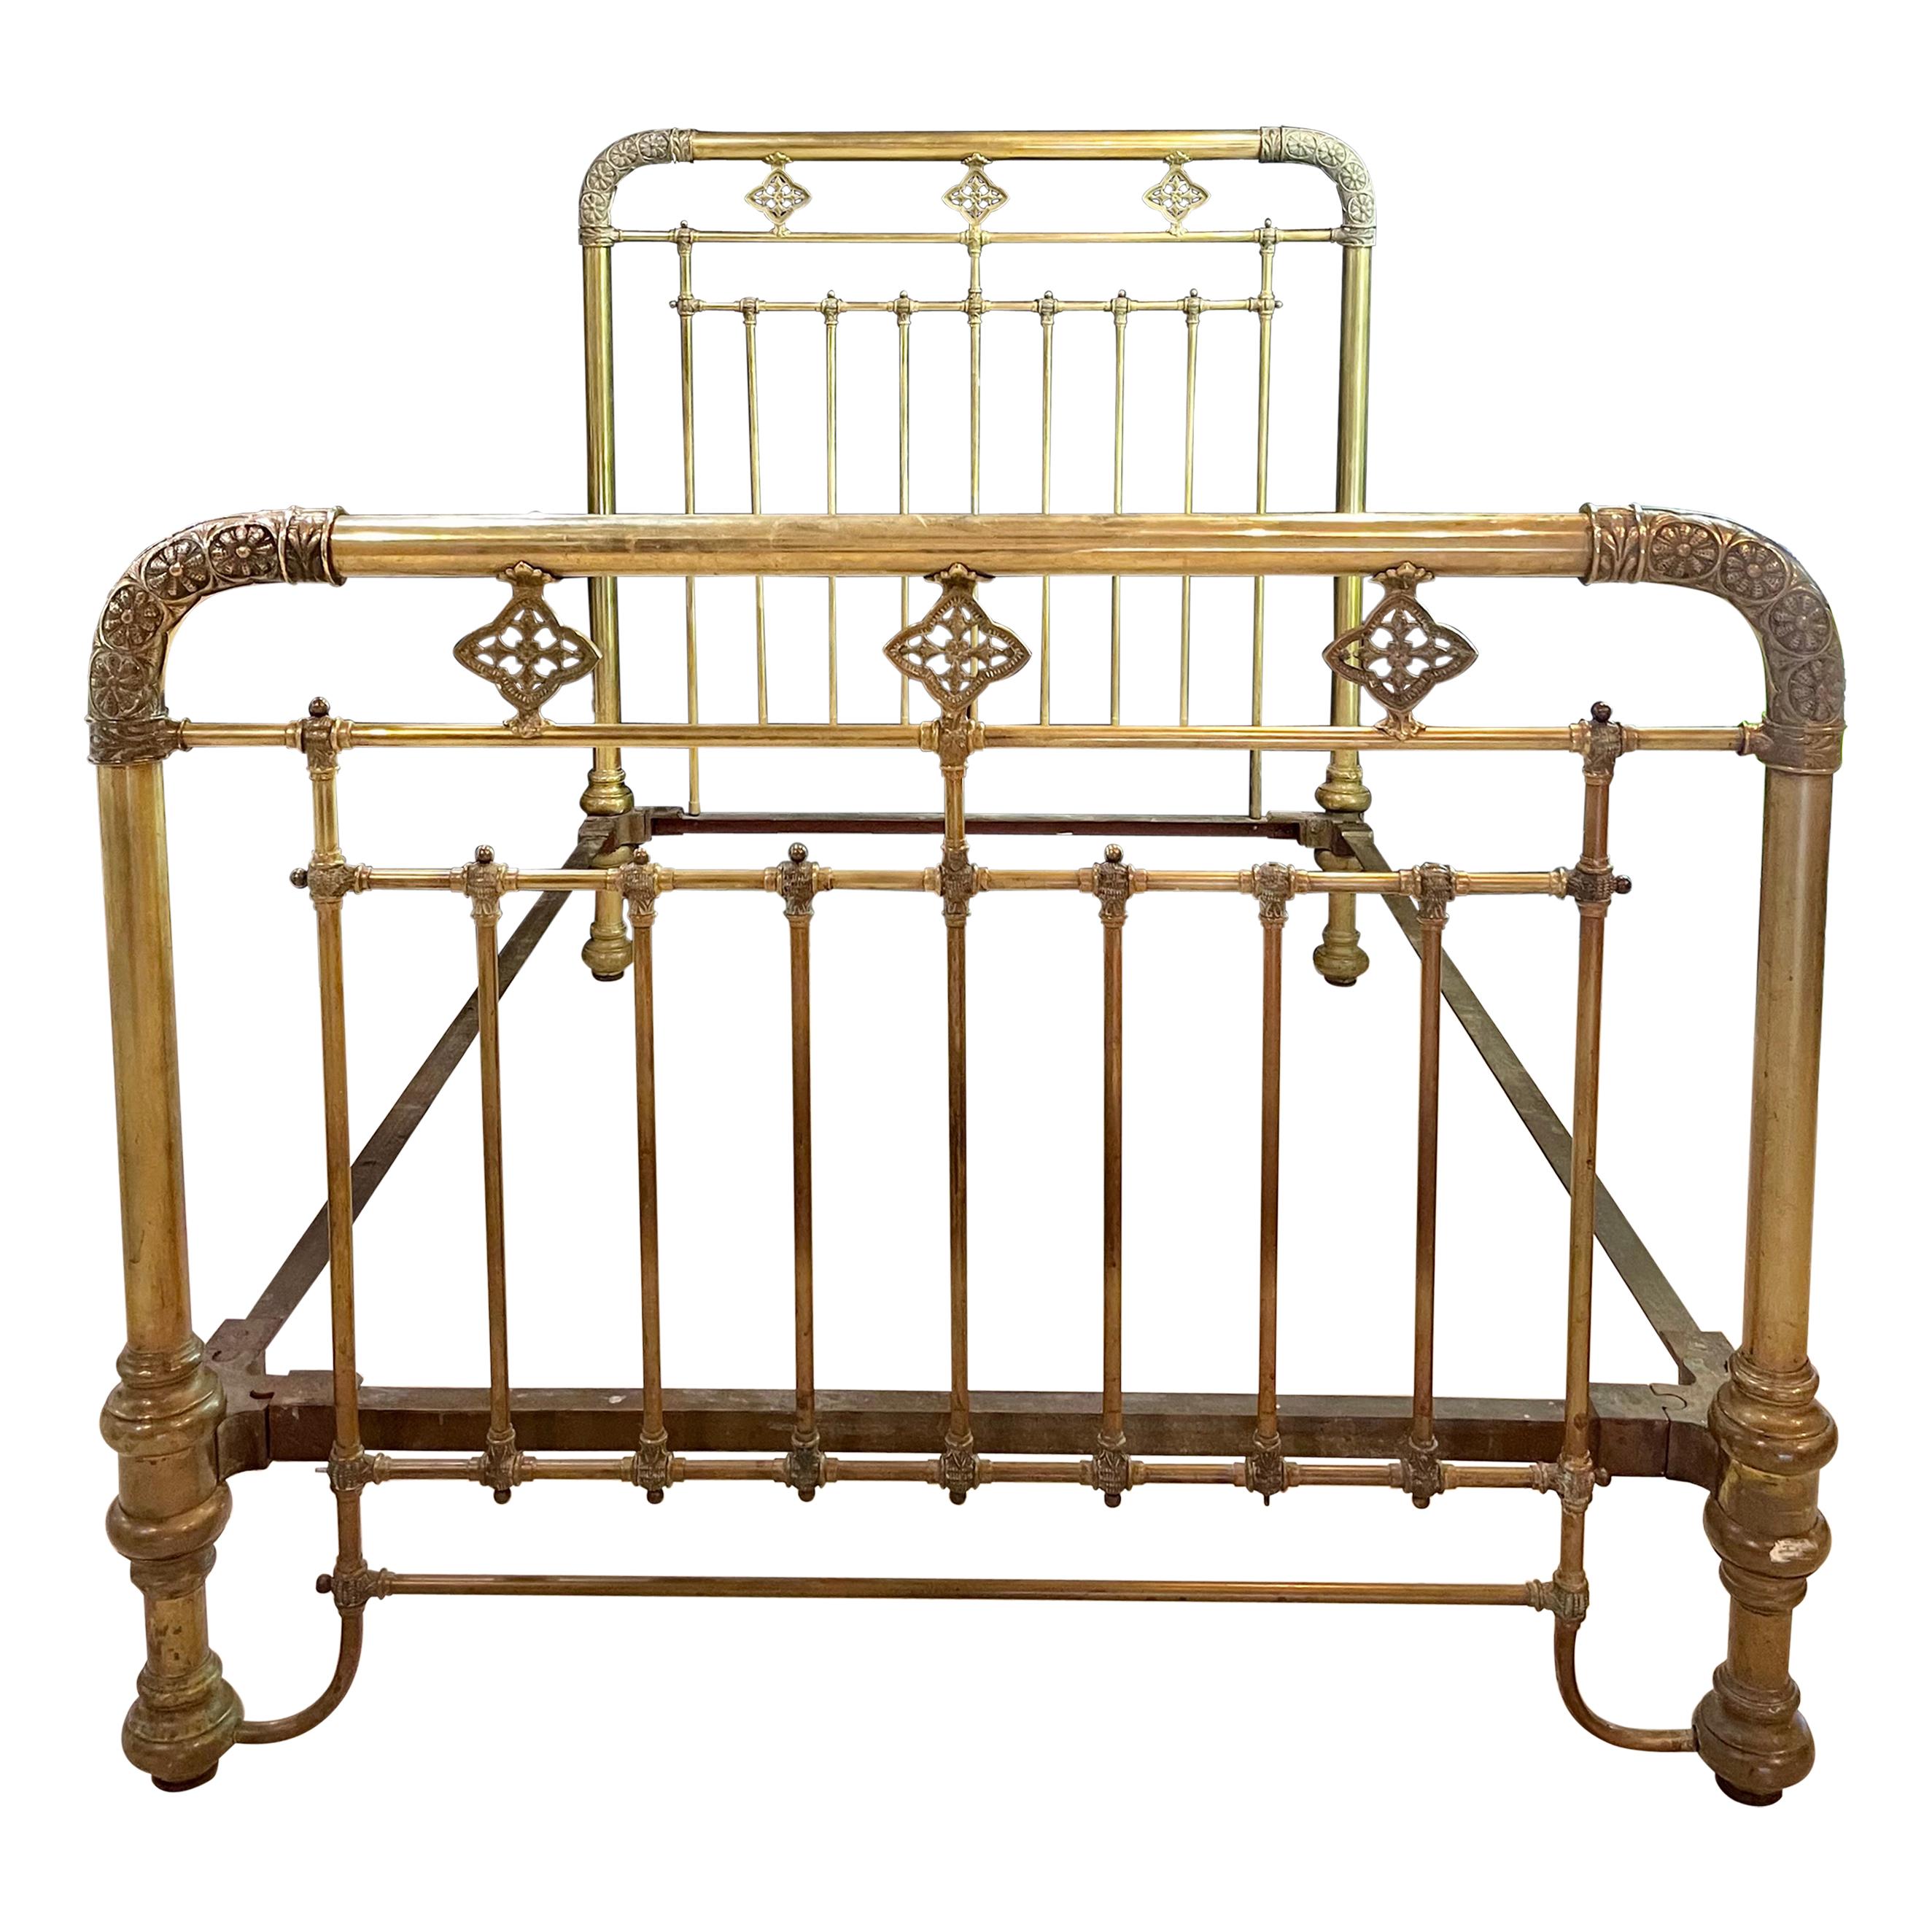 19th-20th Century Brass Bed Frame, Full Sized